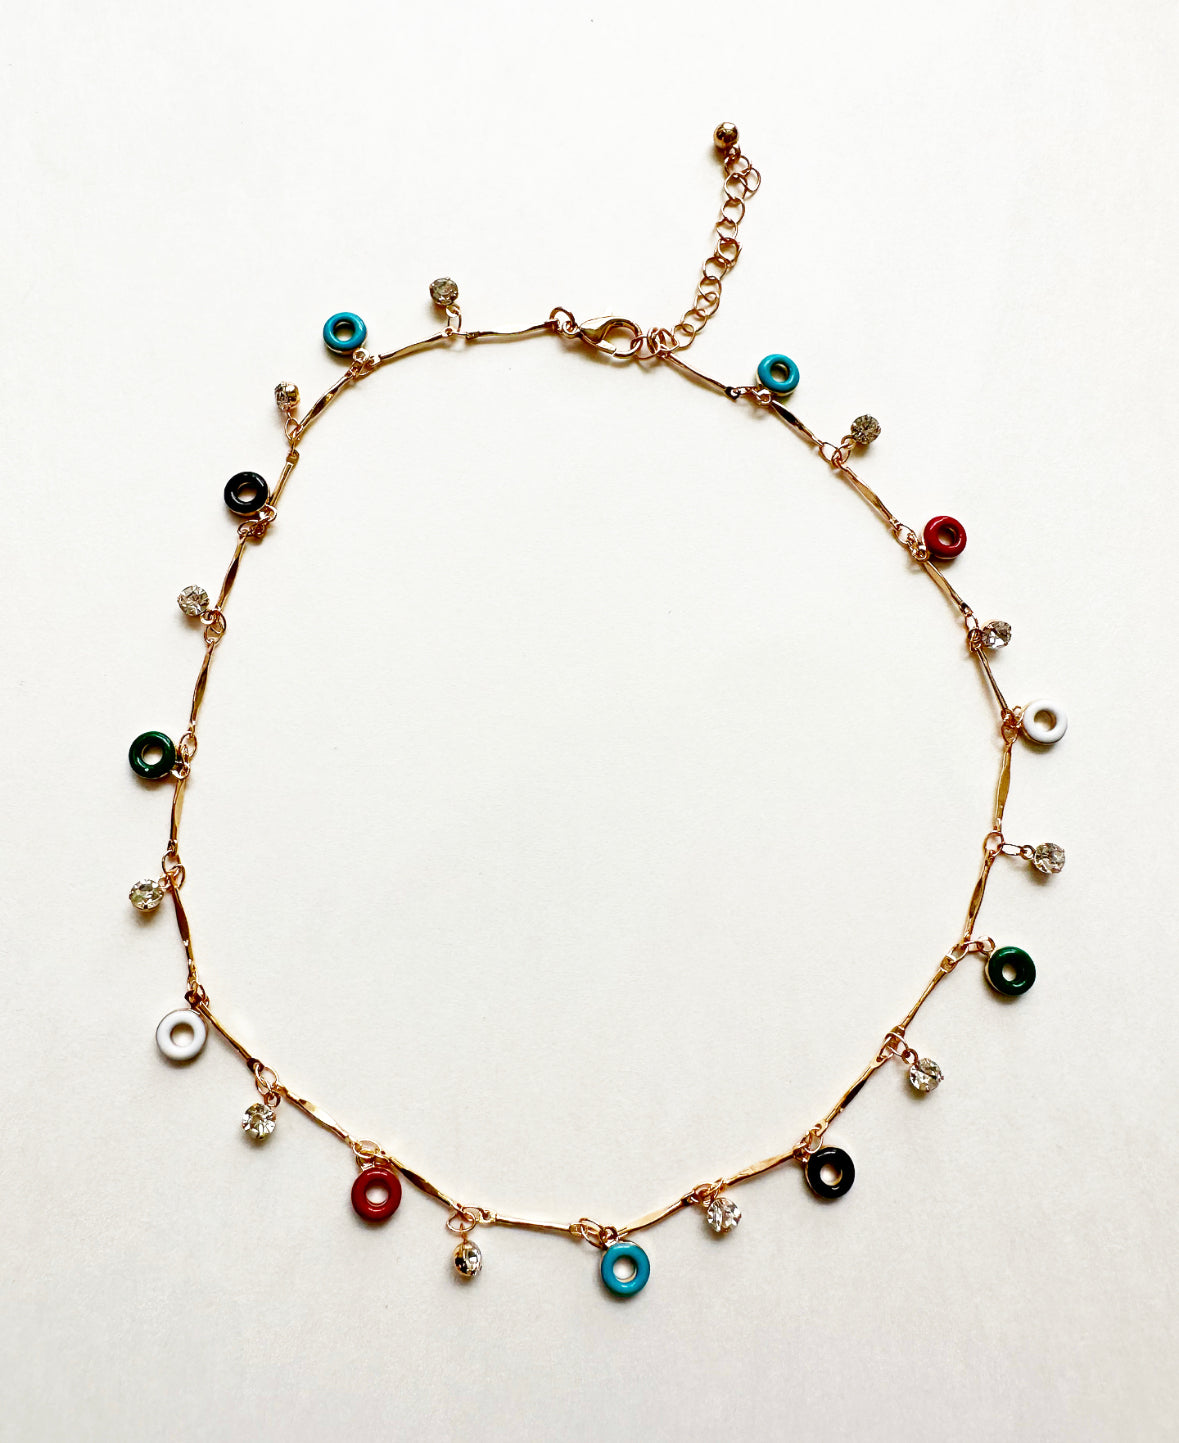 Full view of Confection Choker Necklace.